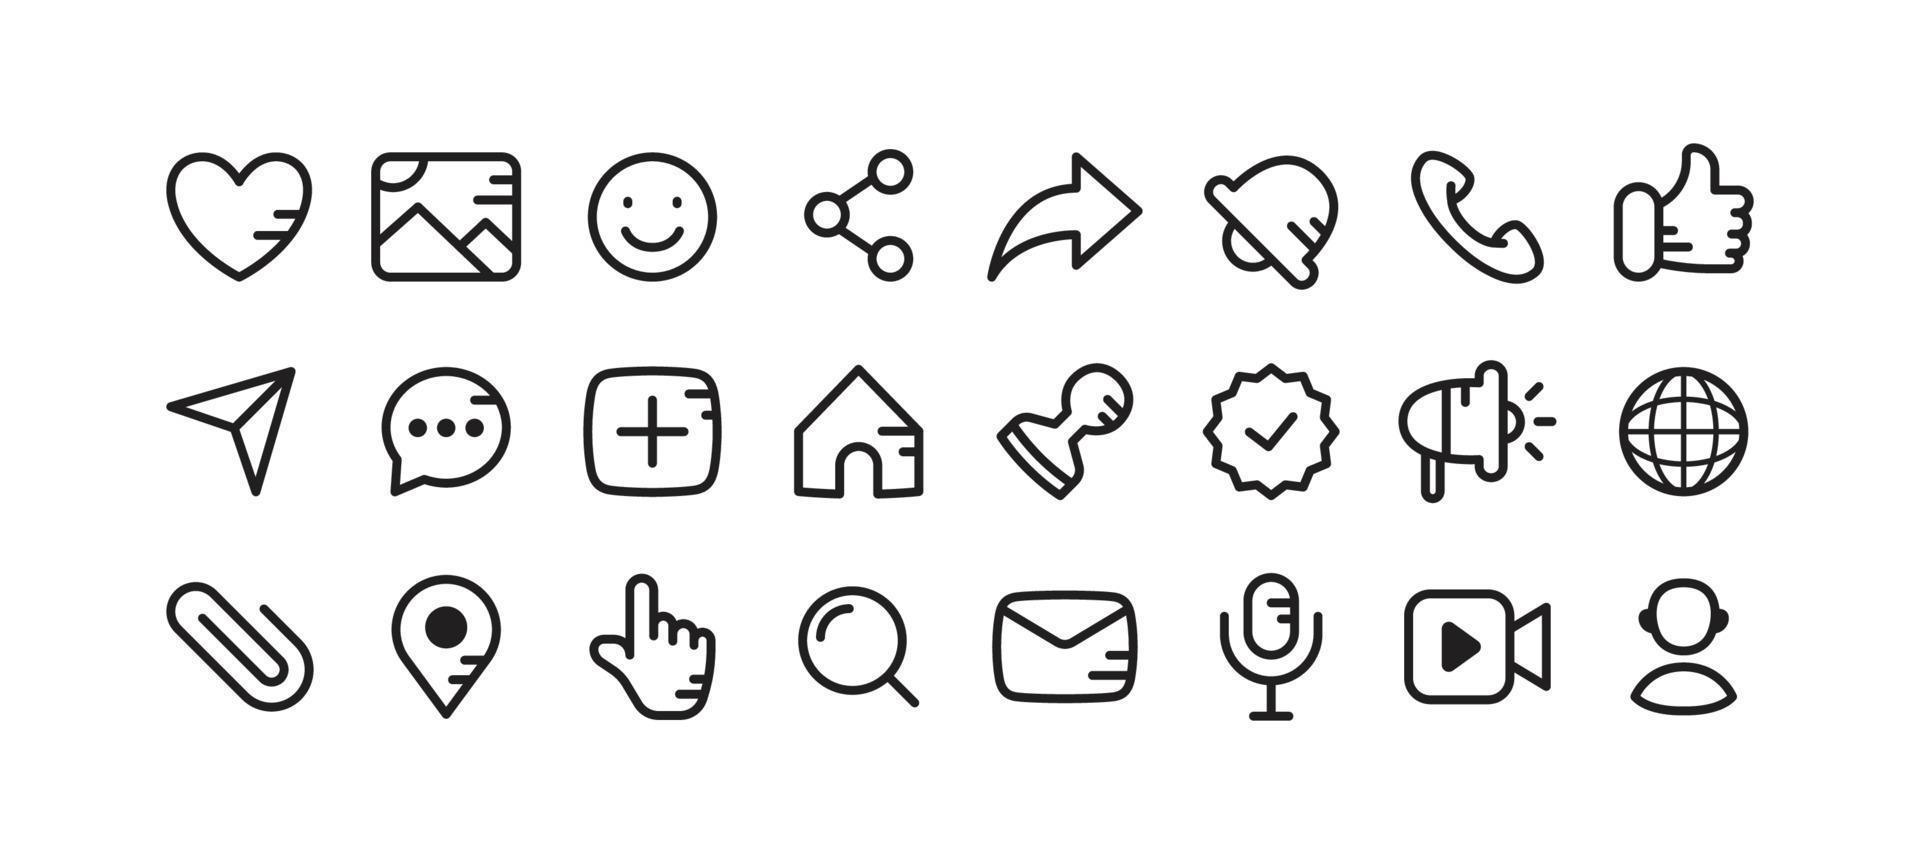 Cute Action and Reaction Social media Icon Set with Outline Style vector